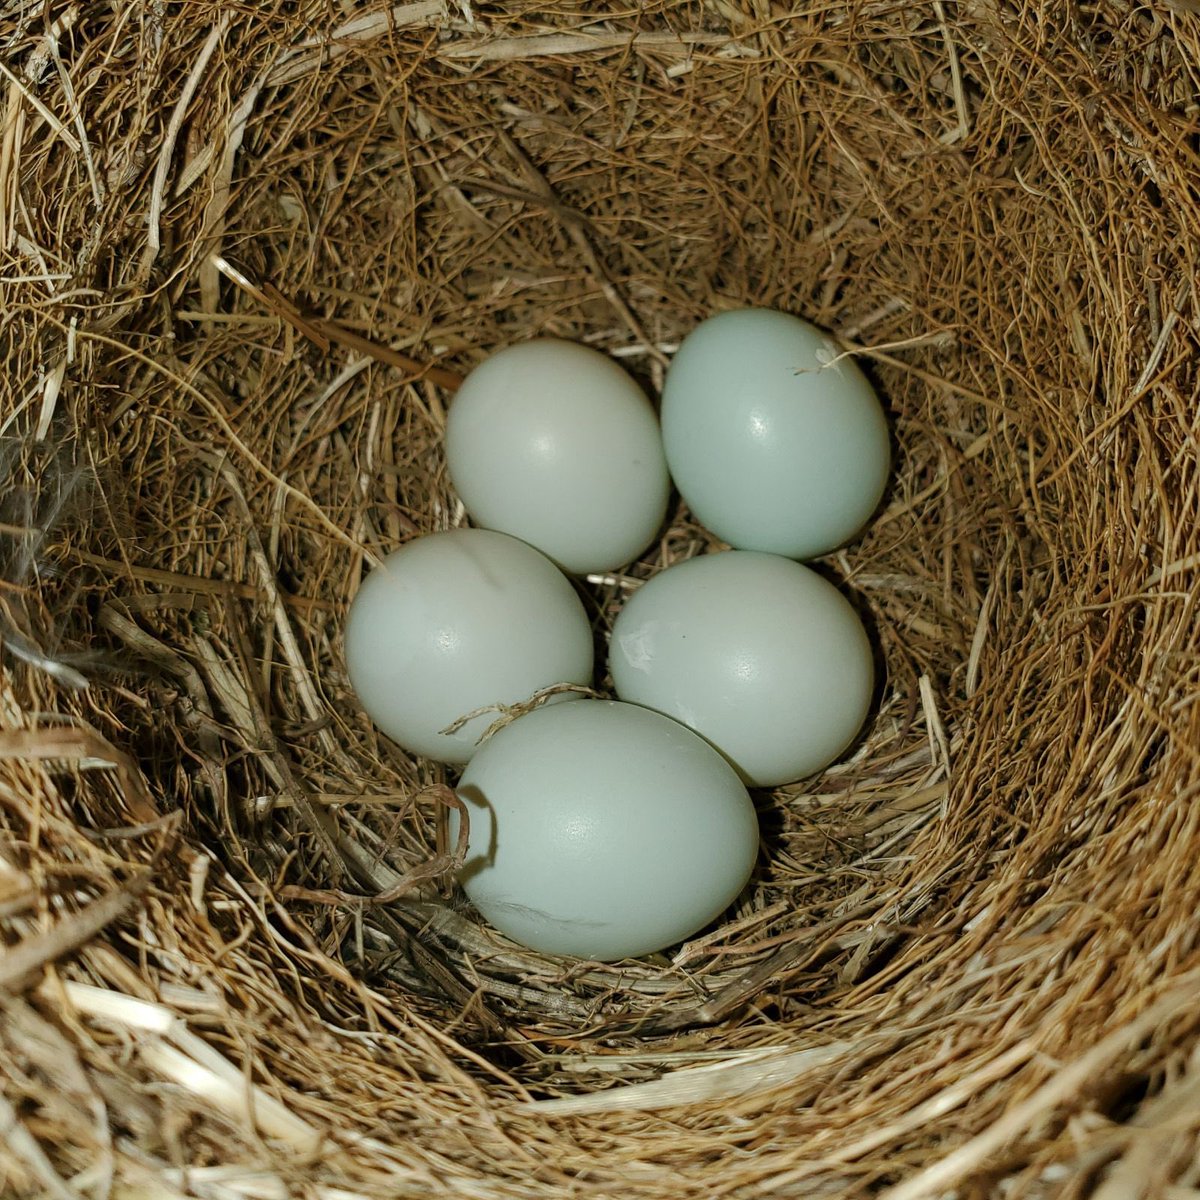 One a day…our resident mama bluebird laid one egg each day this week. We’ll keep an eye on our quintuplets and keep you posted on how they fare. #HappySpring #Bluebirds @YaleLibrary